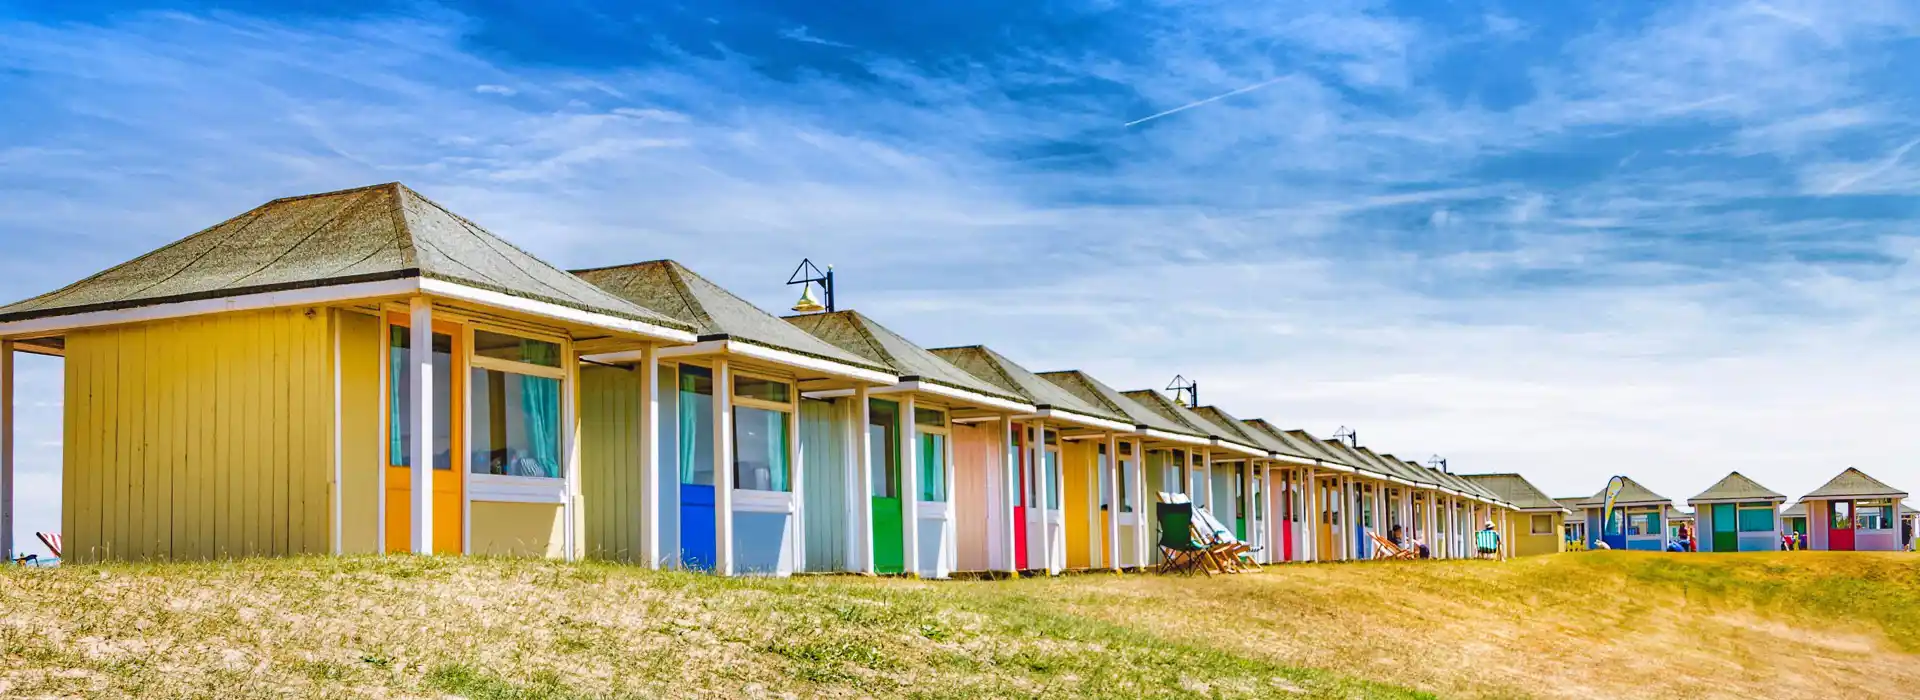 Mablethorpe campsites